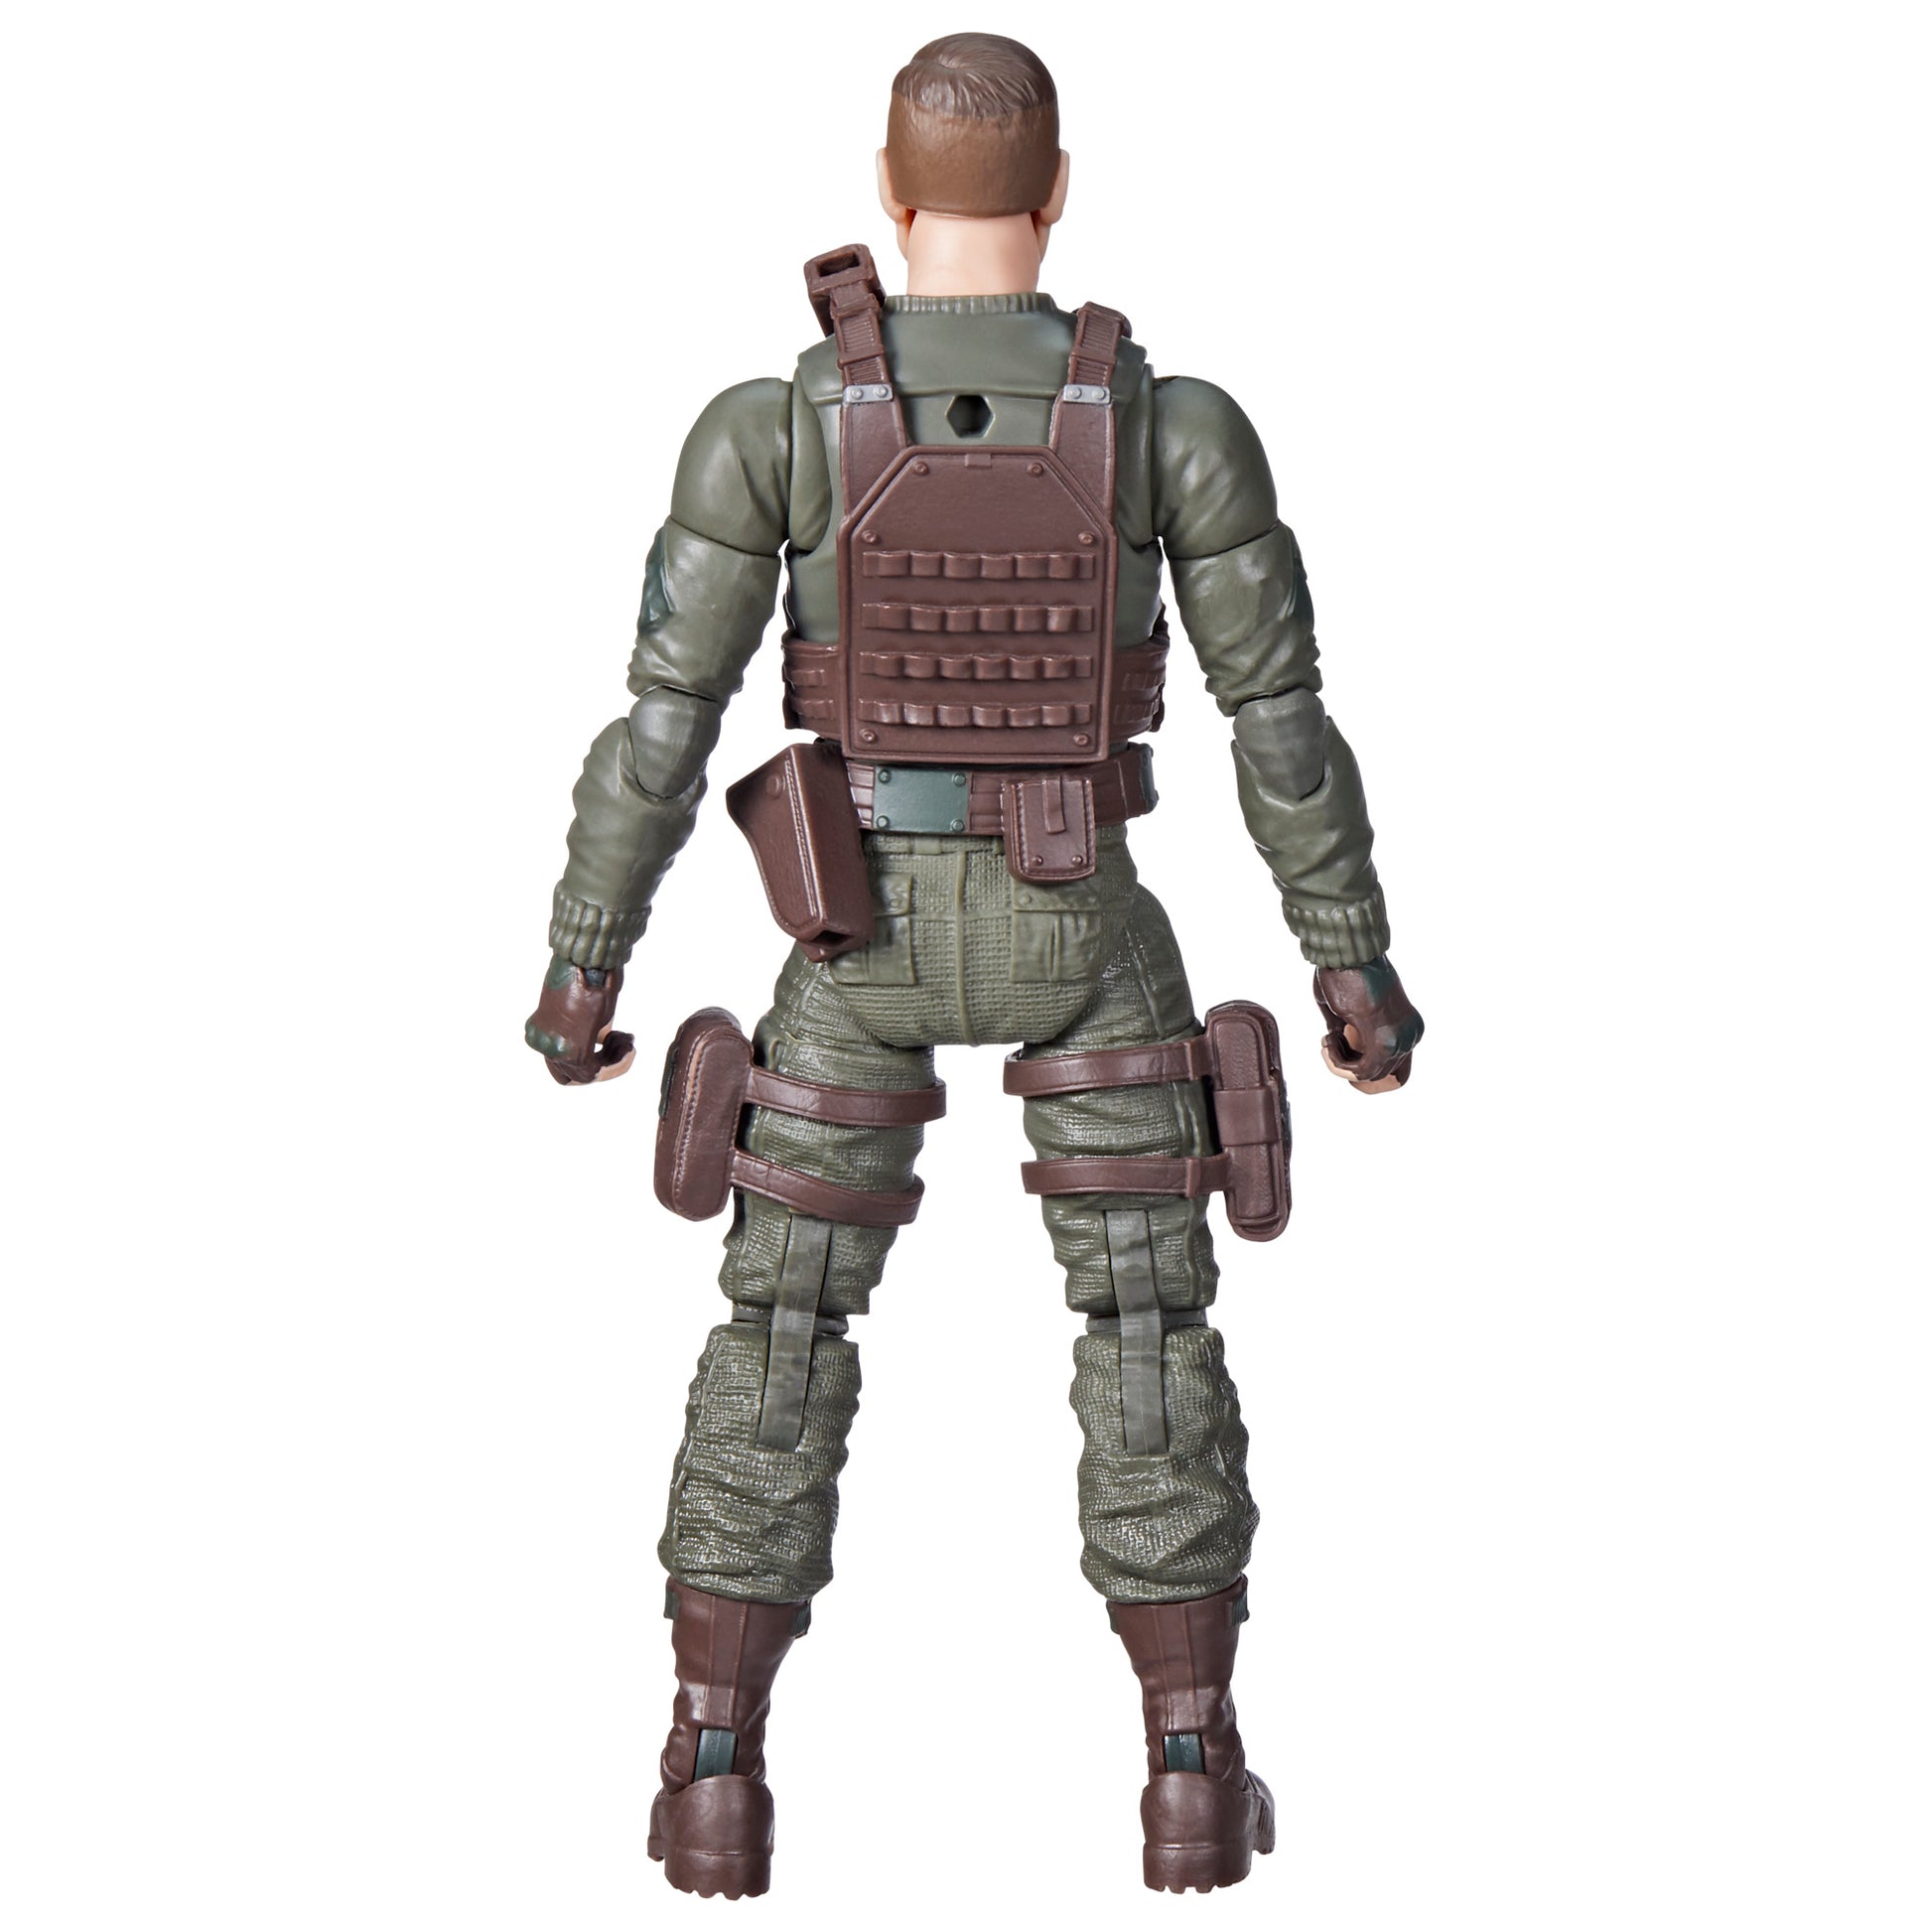 G.I. Joe Classified Series Robert "Grunt" Graves, 87 Action Figure Toy back view - Heretoserveyou